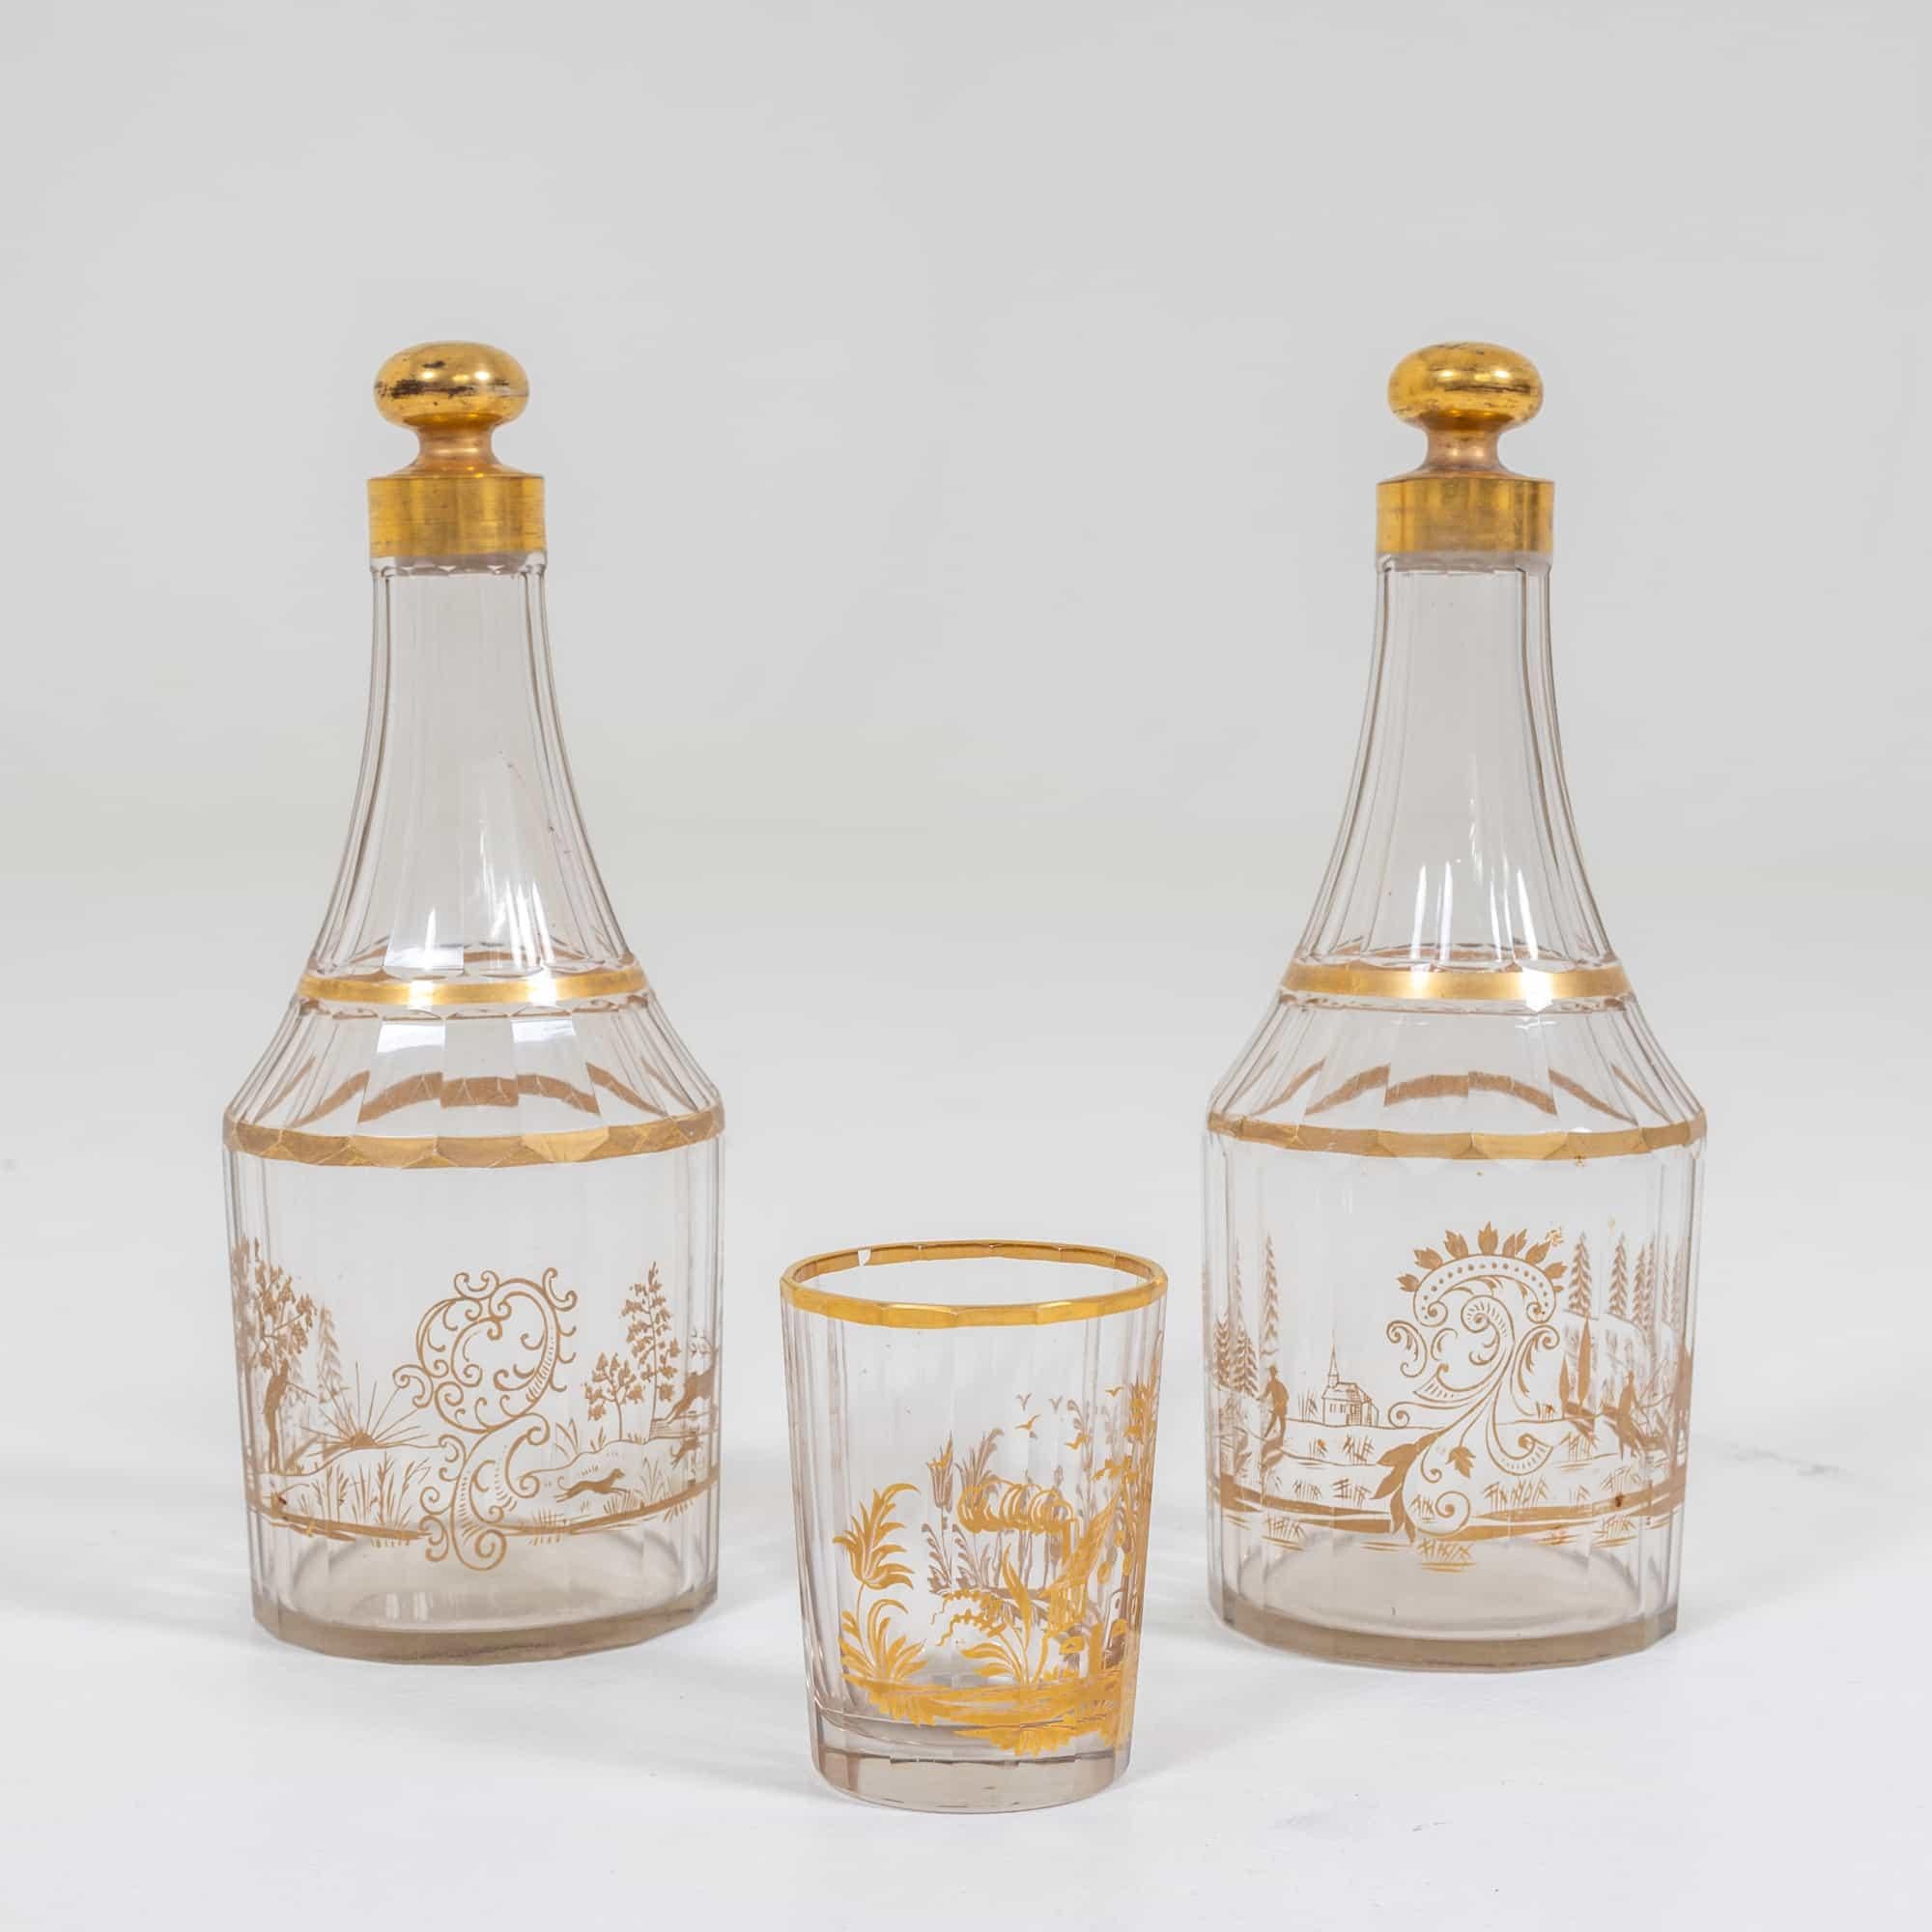 Two faceted carafes made of clear glass with stopper and gold painting. Comes with a matching drinking cup (9.5 x Ø7 cm).